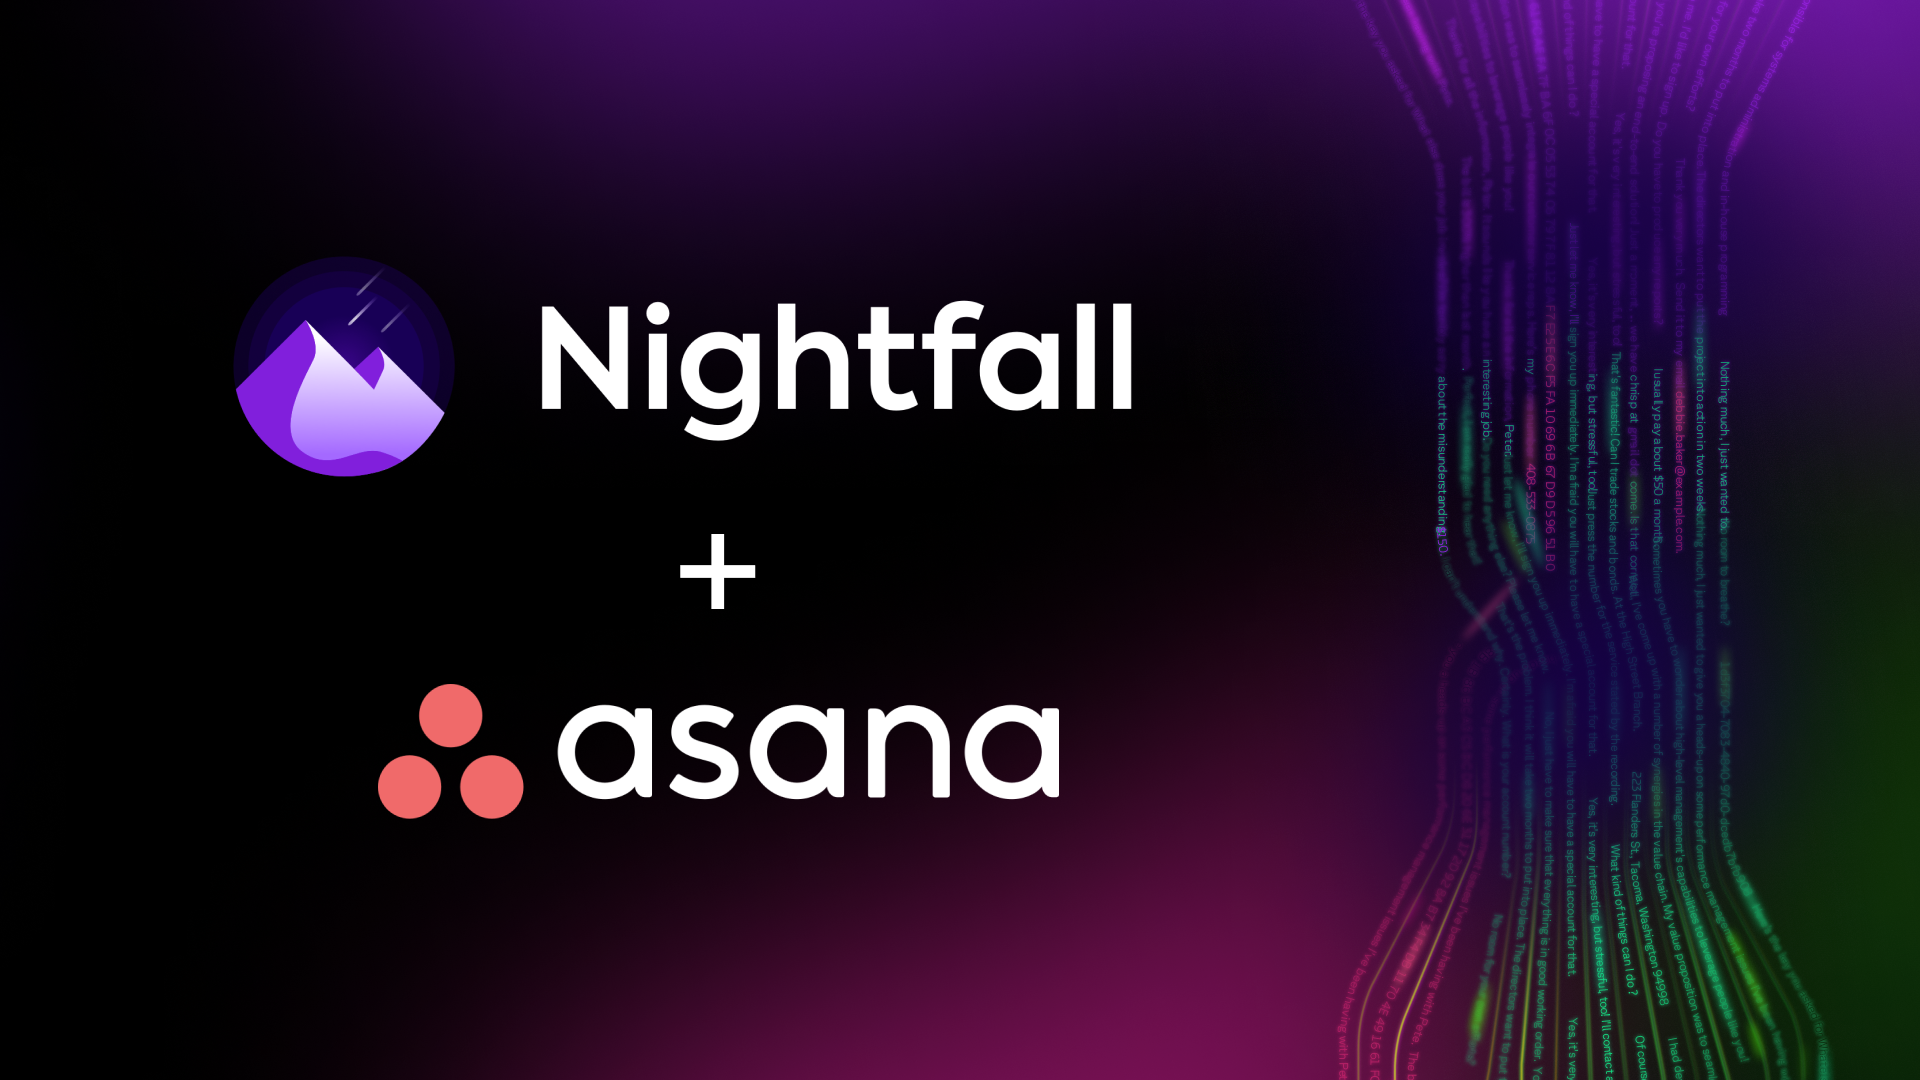 Nightfall launches the first and only DLP solution for Asana